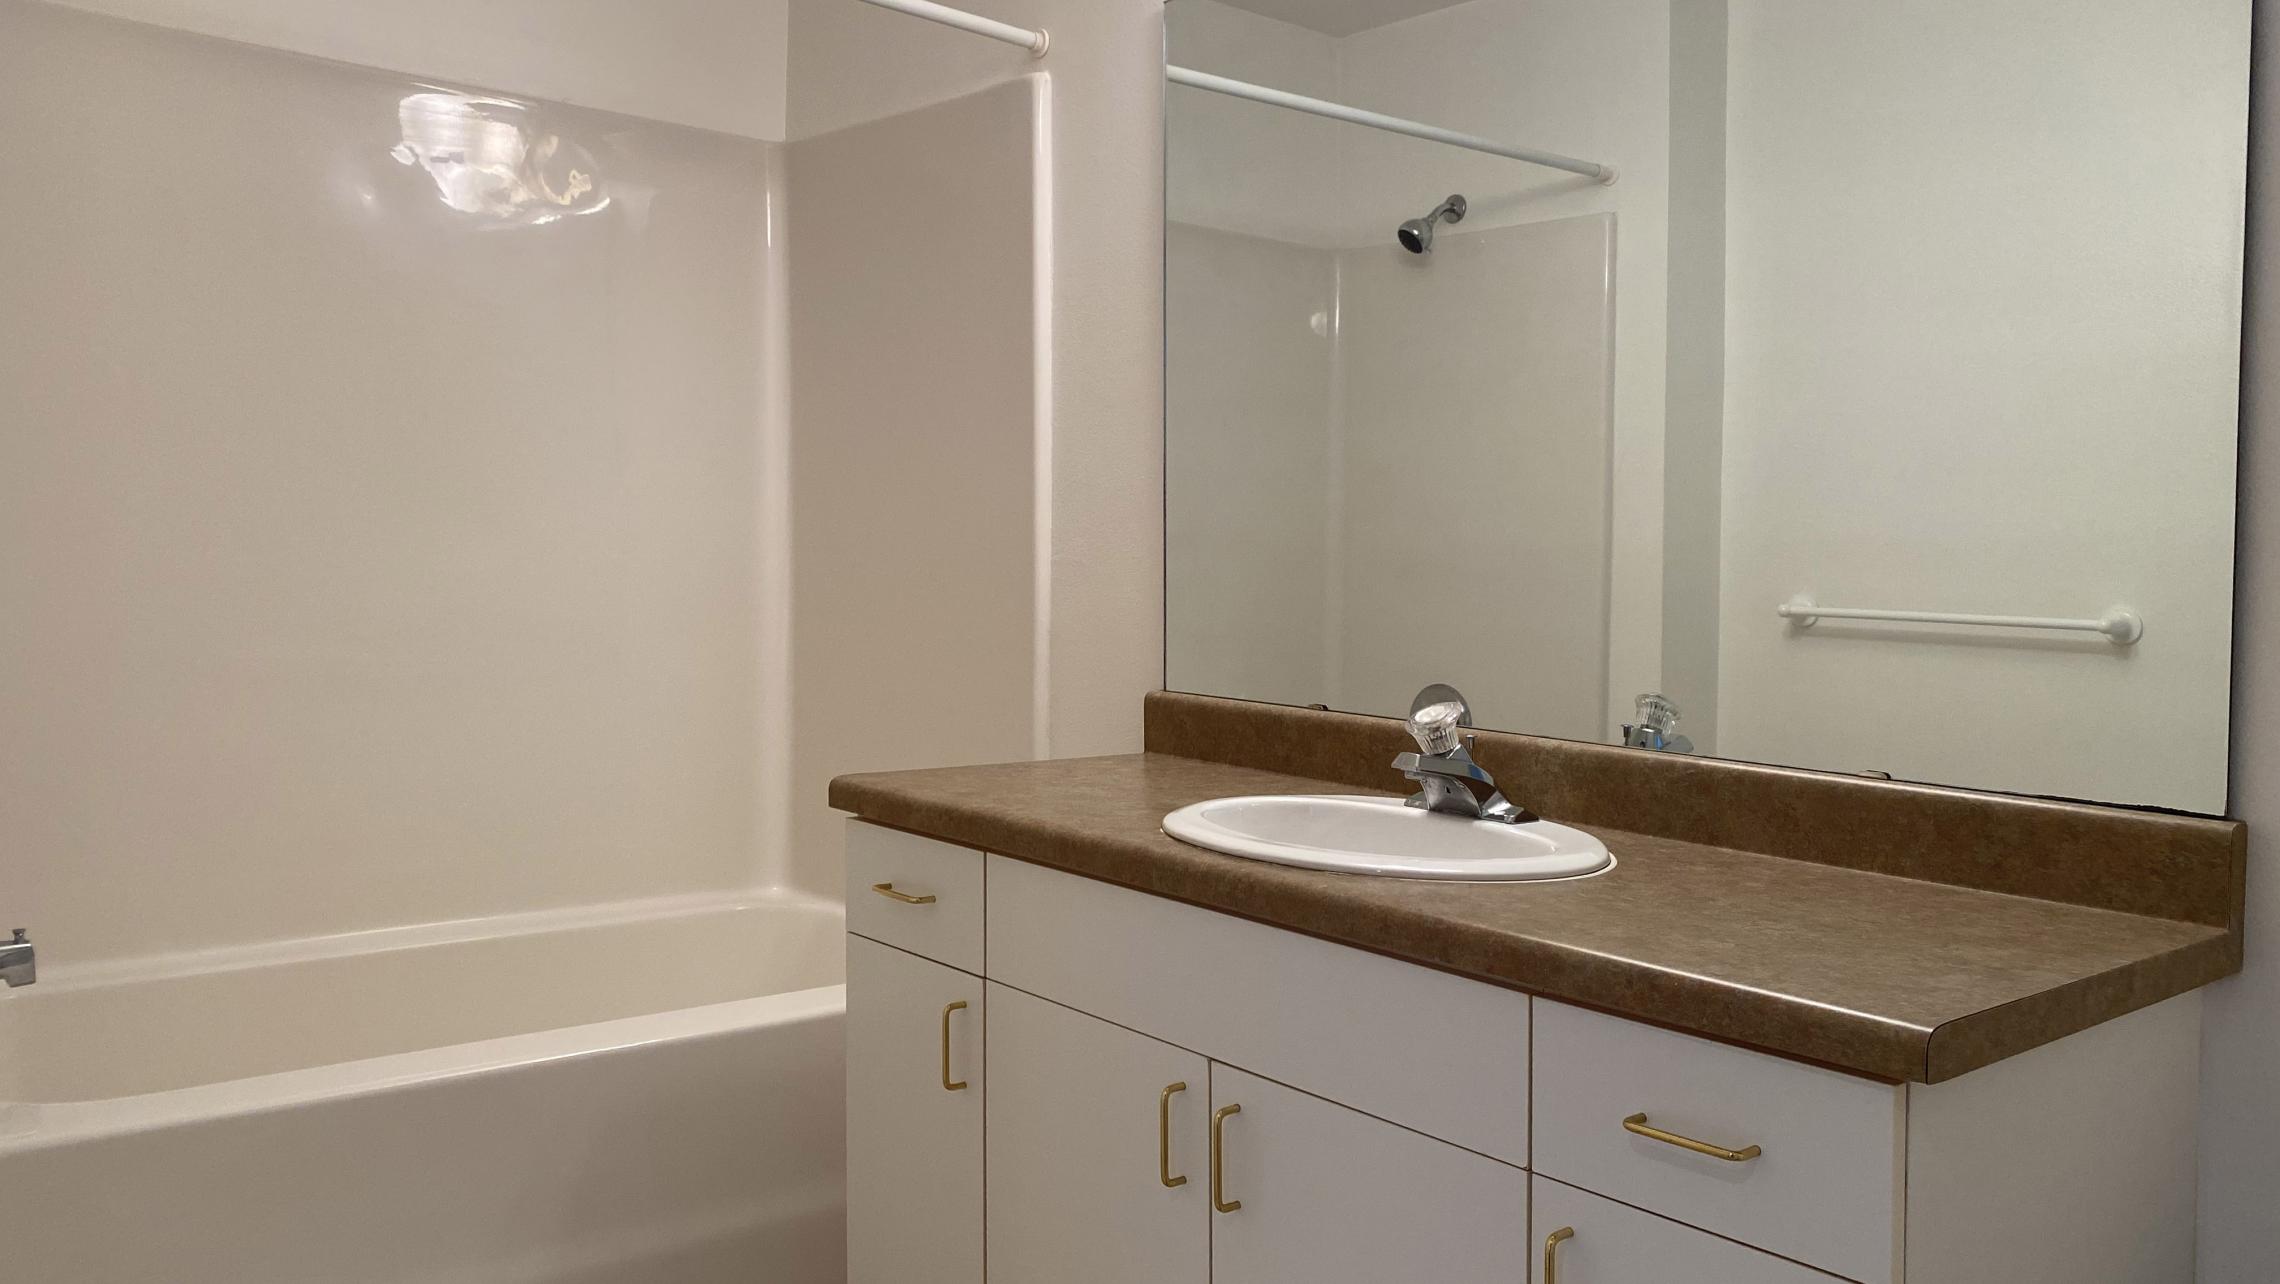 City-Place-Apartment-408-One-Bedroom-Natural-Light-Sunny-Bright-Bathroom-Kitchen-Living-Balcony-Downtown-Madison-Bike-City-Capitol-Lifestyle-Home-Laundry-Storage-Closet-Bathtub